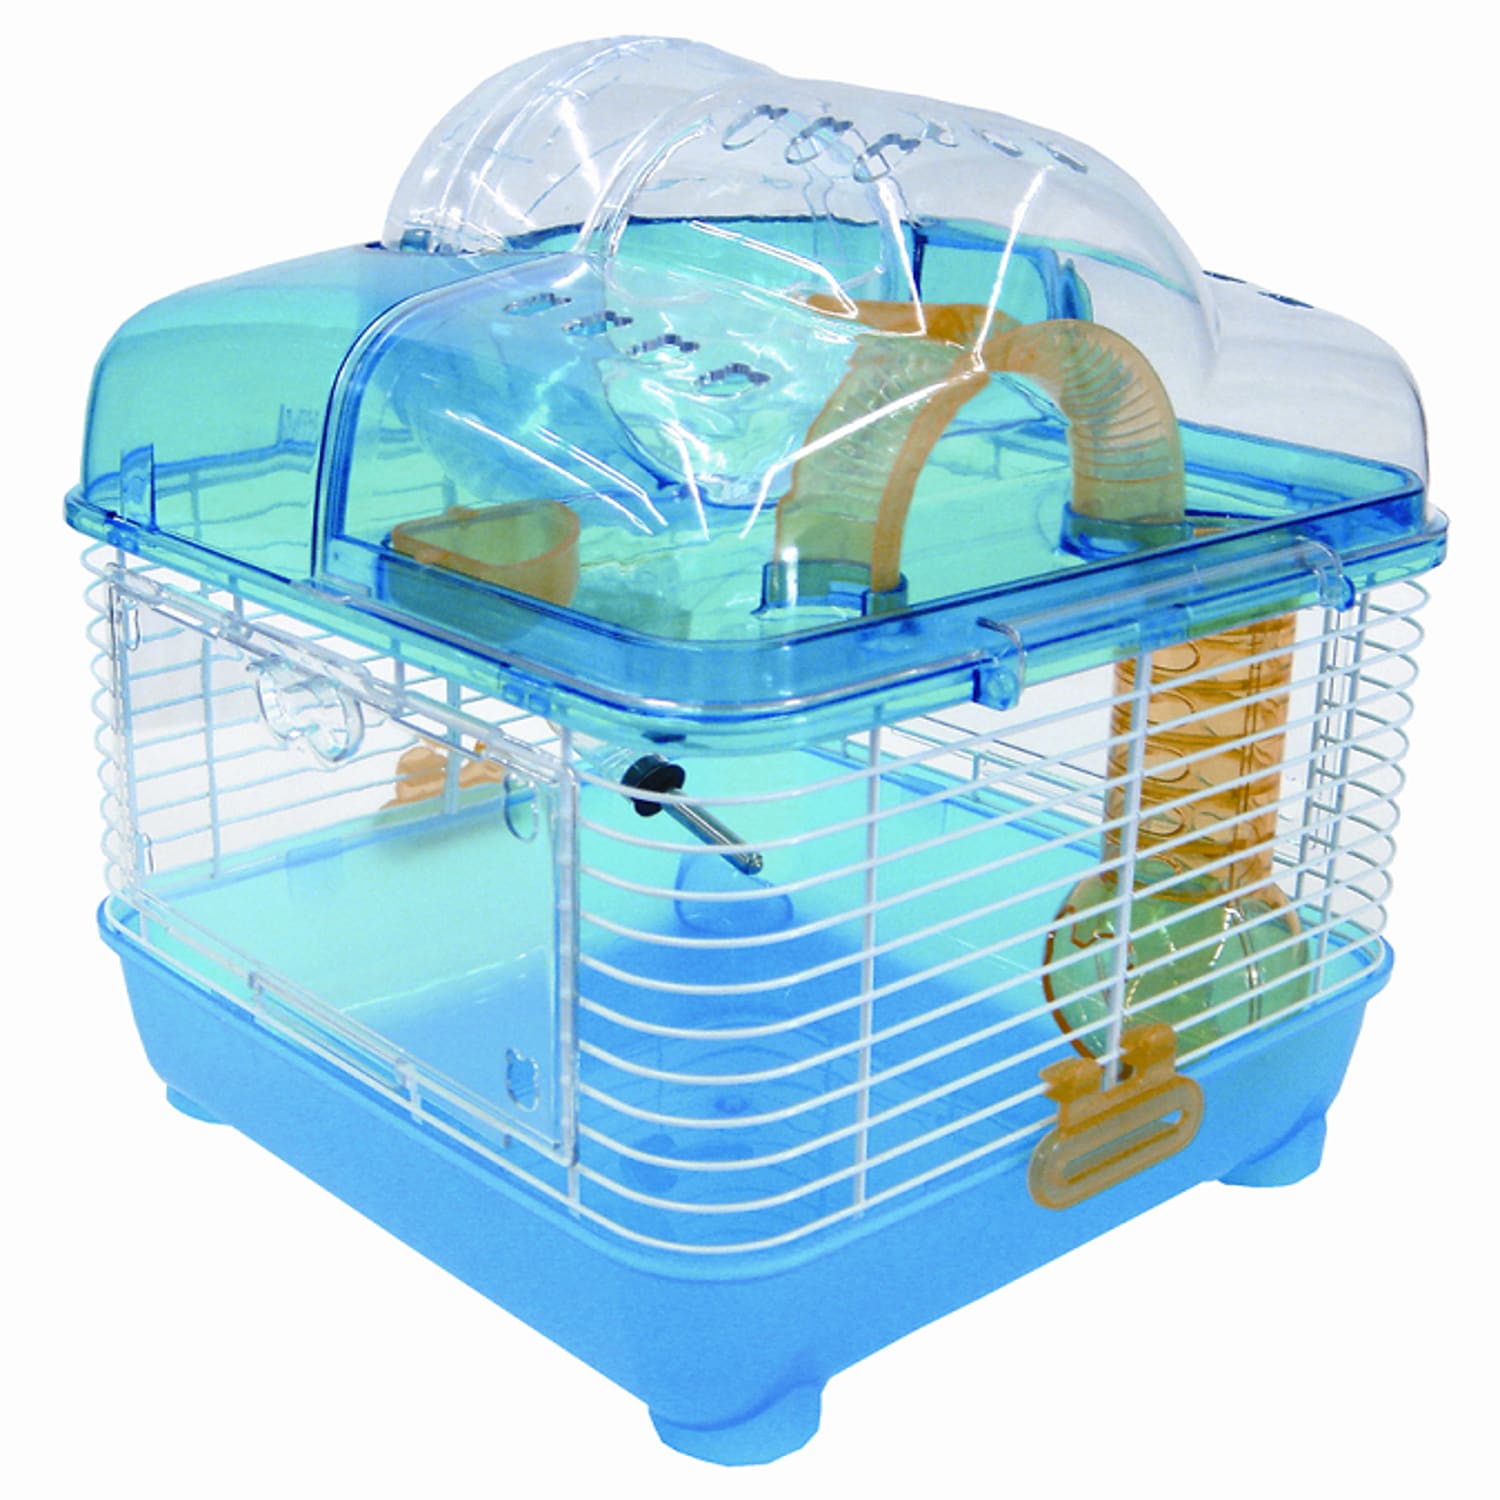 Photos - Rodent Cage / House YML Clear Blue Hamster Cage, 10" L X 10" W X 12" H, 10 IN, Blue H1010 